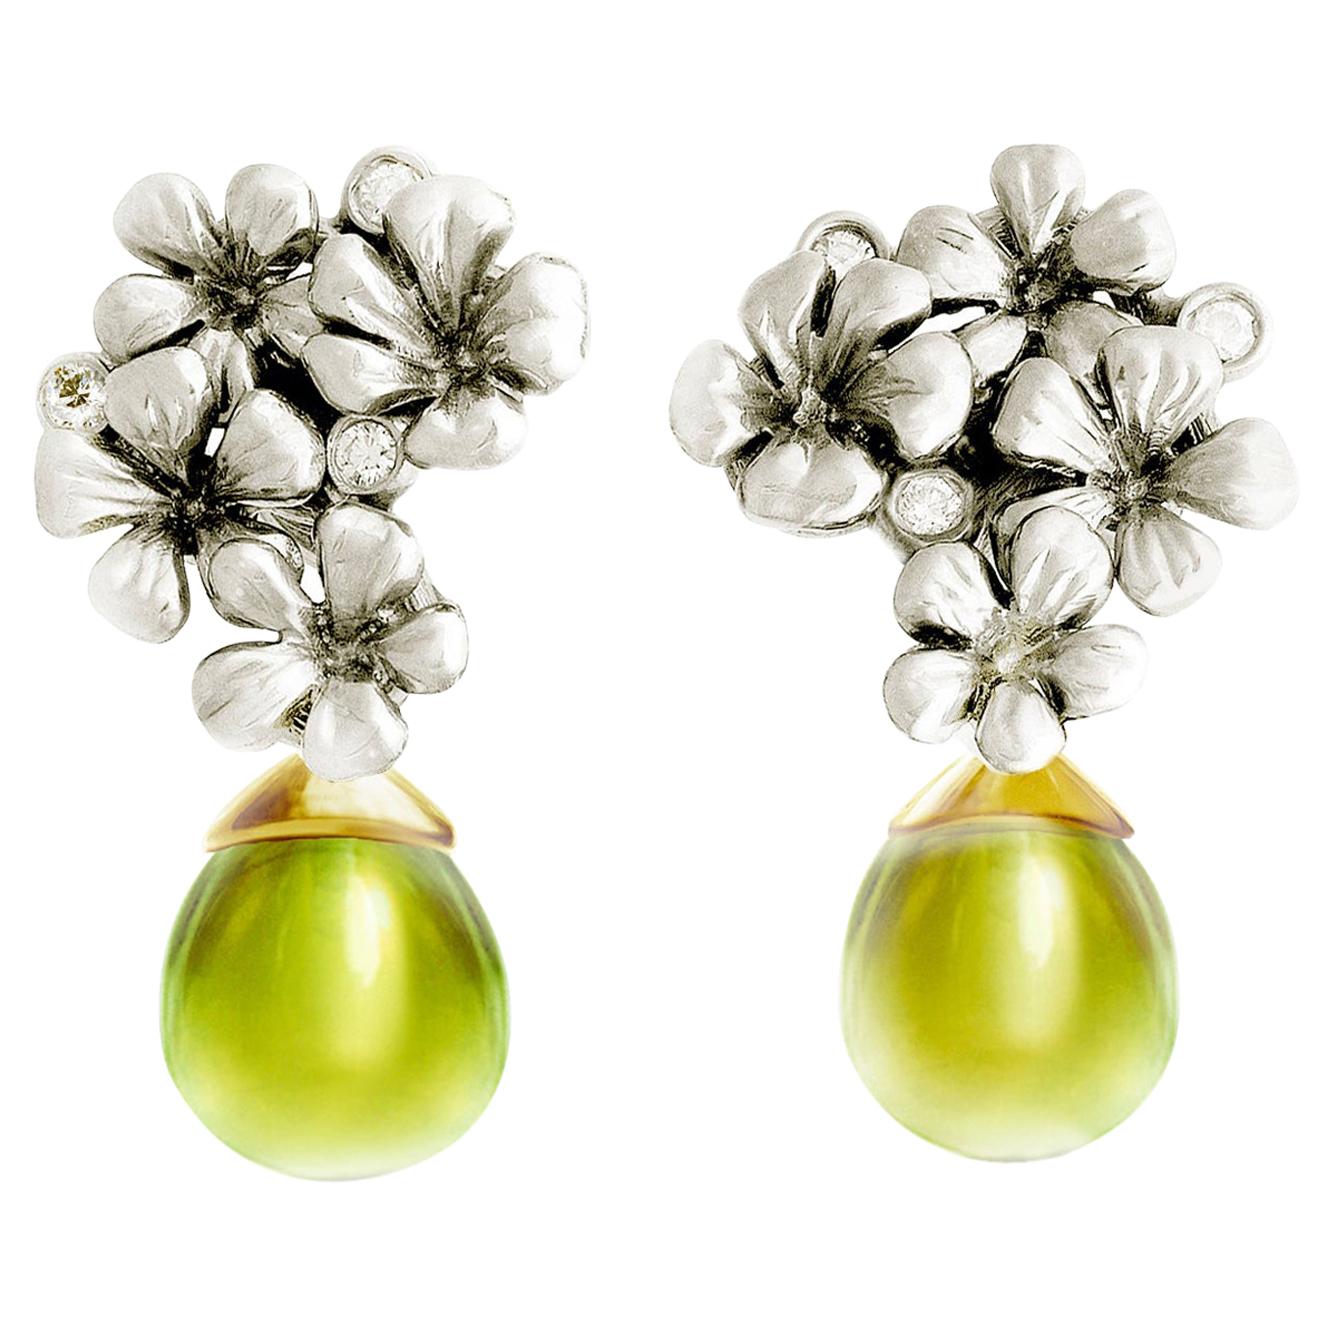 Eighteen Karat White Gold Flowers Clip-On Earrings by the Artist with Diamonds